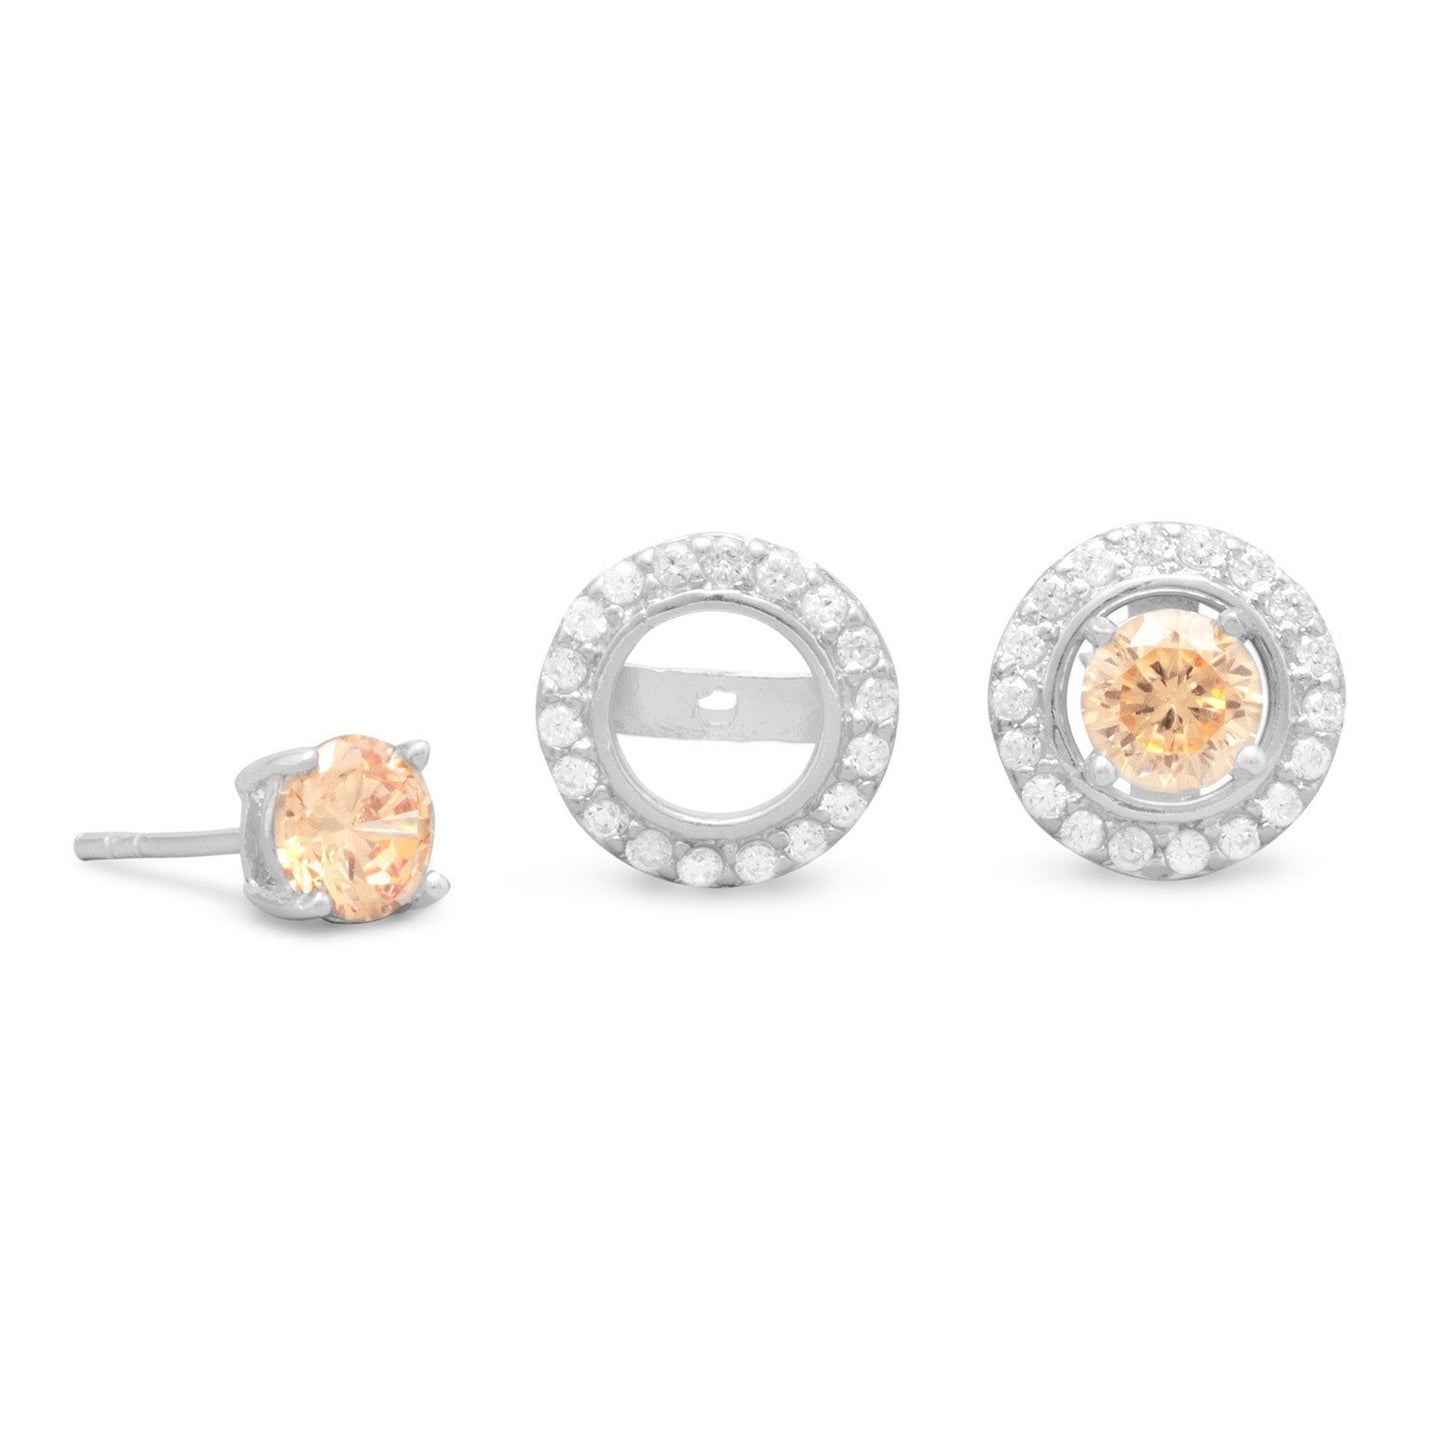 Rhodium Plated CZ Frame Earring Jackets. Pink CZ Stud Earrings Sold Separately.